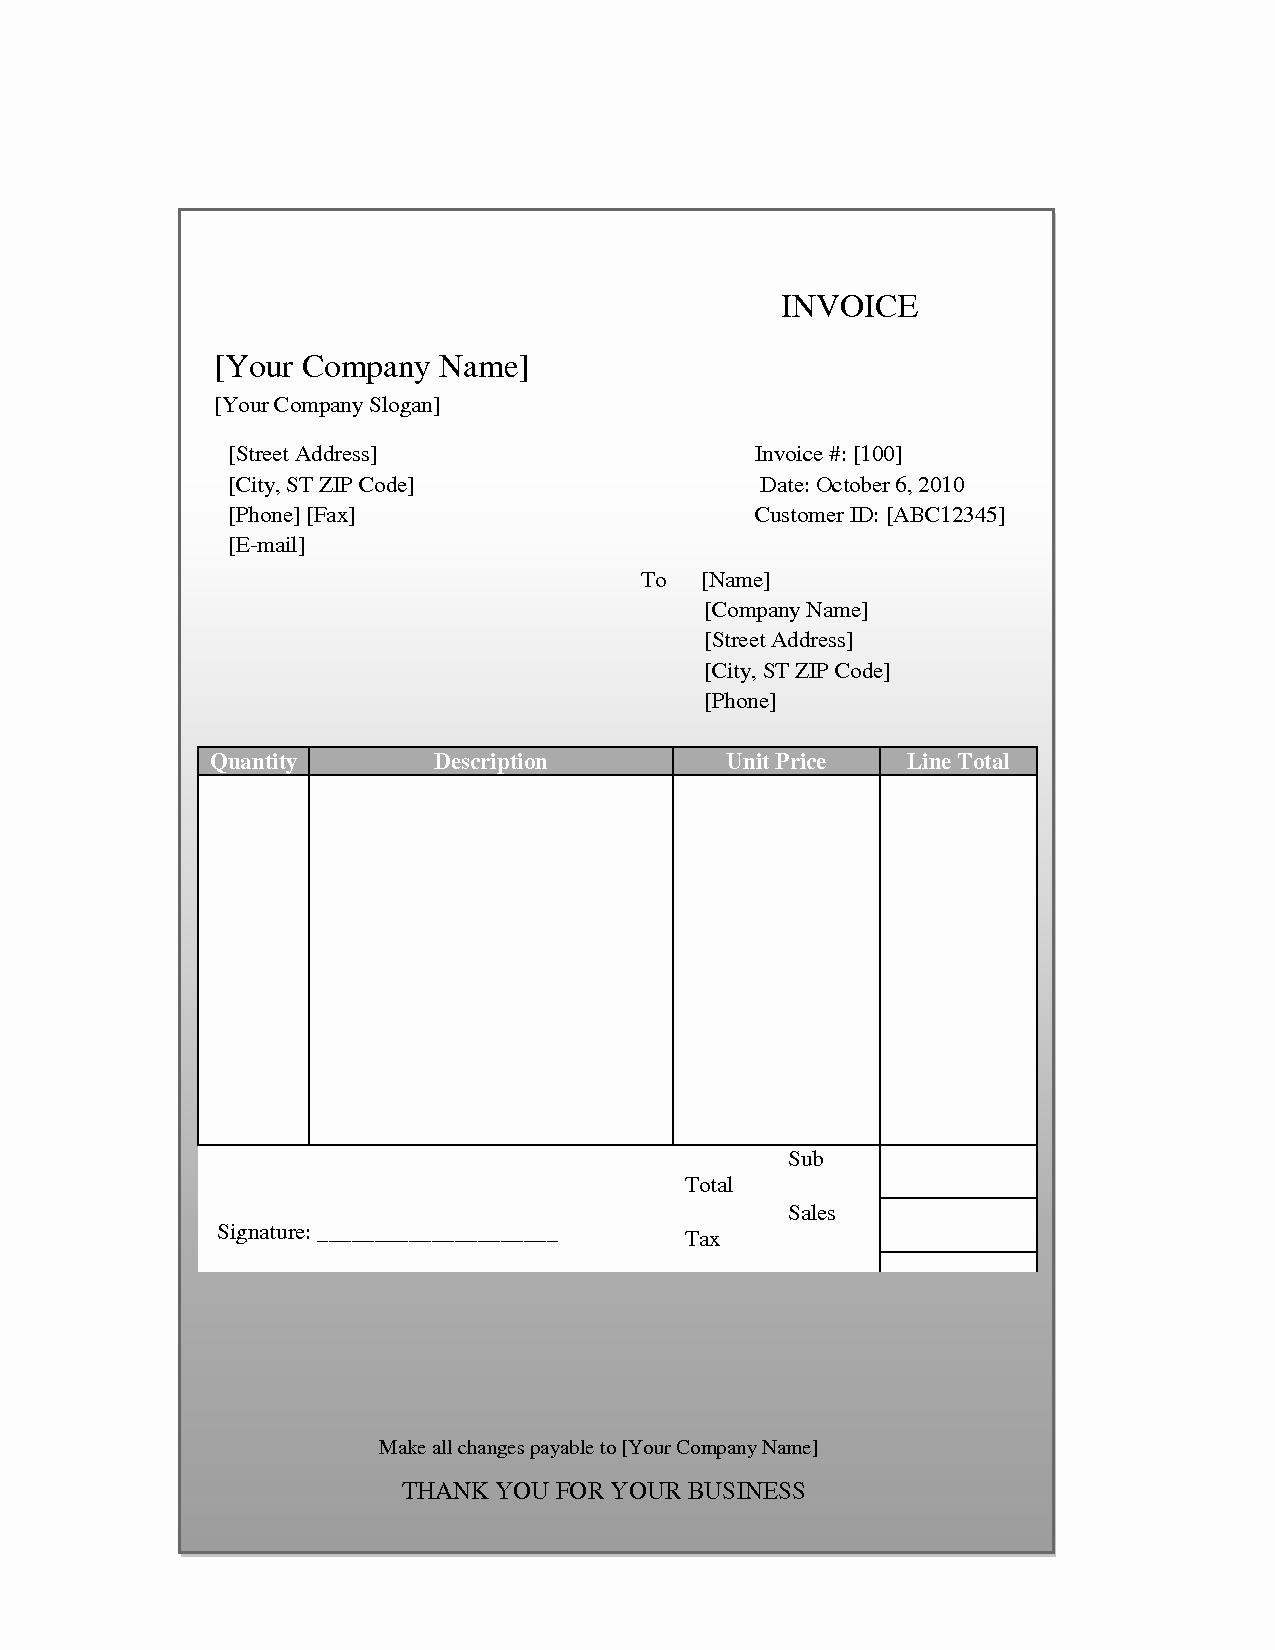 Free Invoice Template for Mac Awesome Word Invoice Template Mac